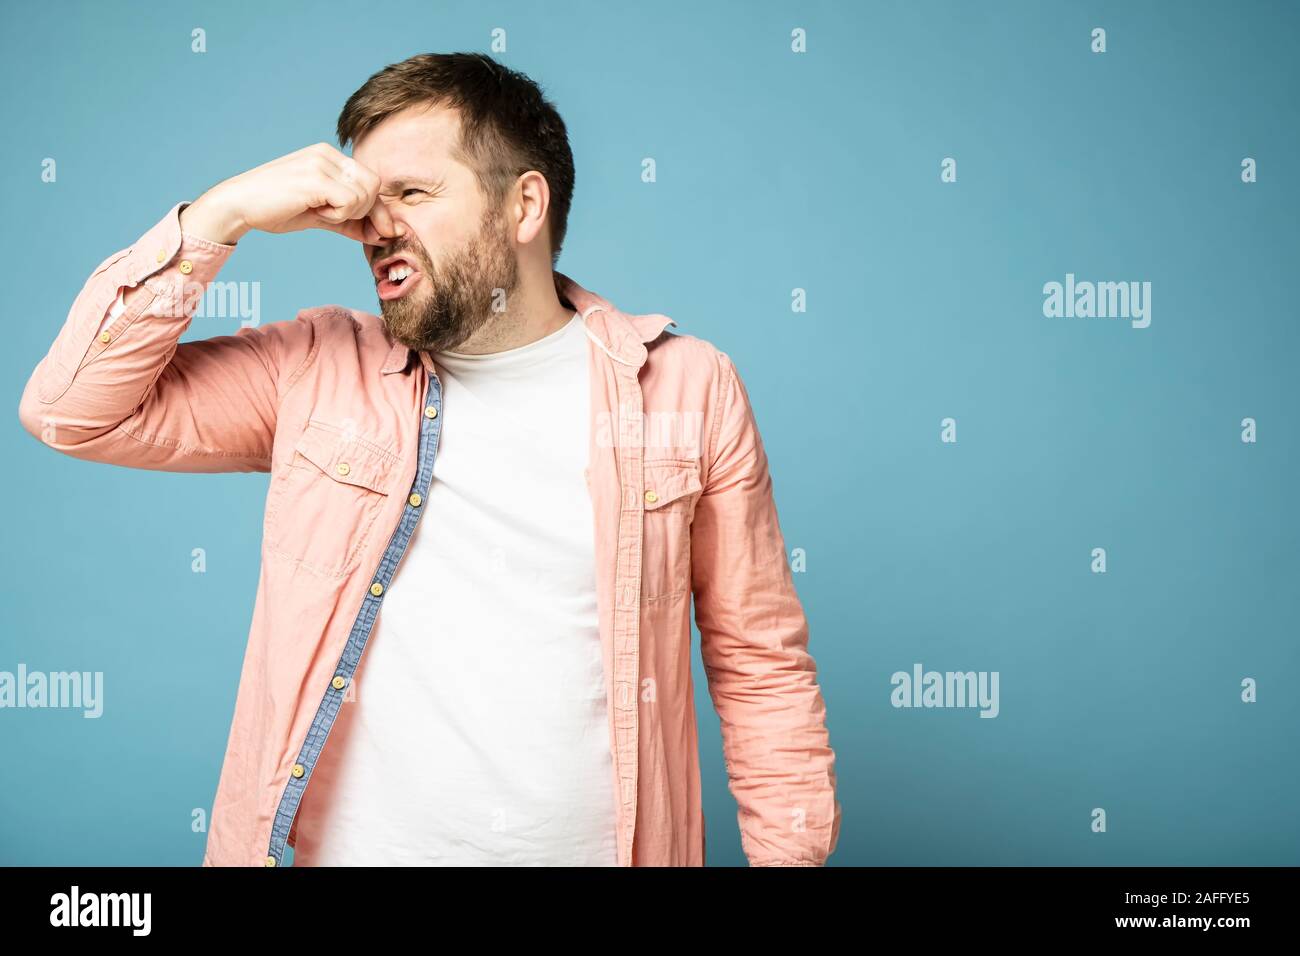 Bearded man squeezes nose with fingers because of an unpleasant odor. Isolated on a blue background. Stock Photo